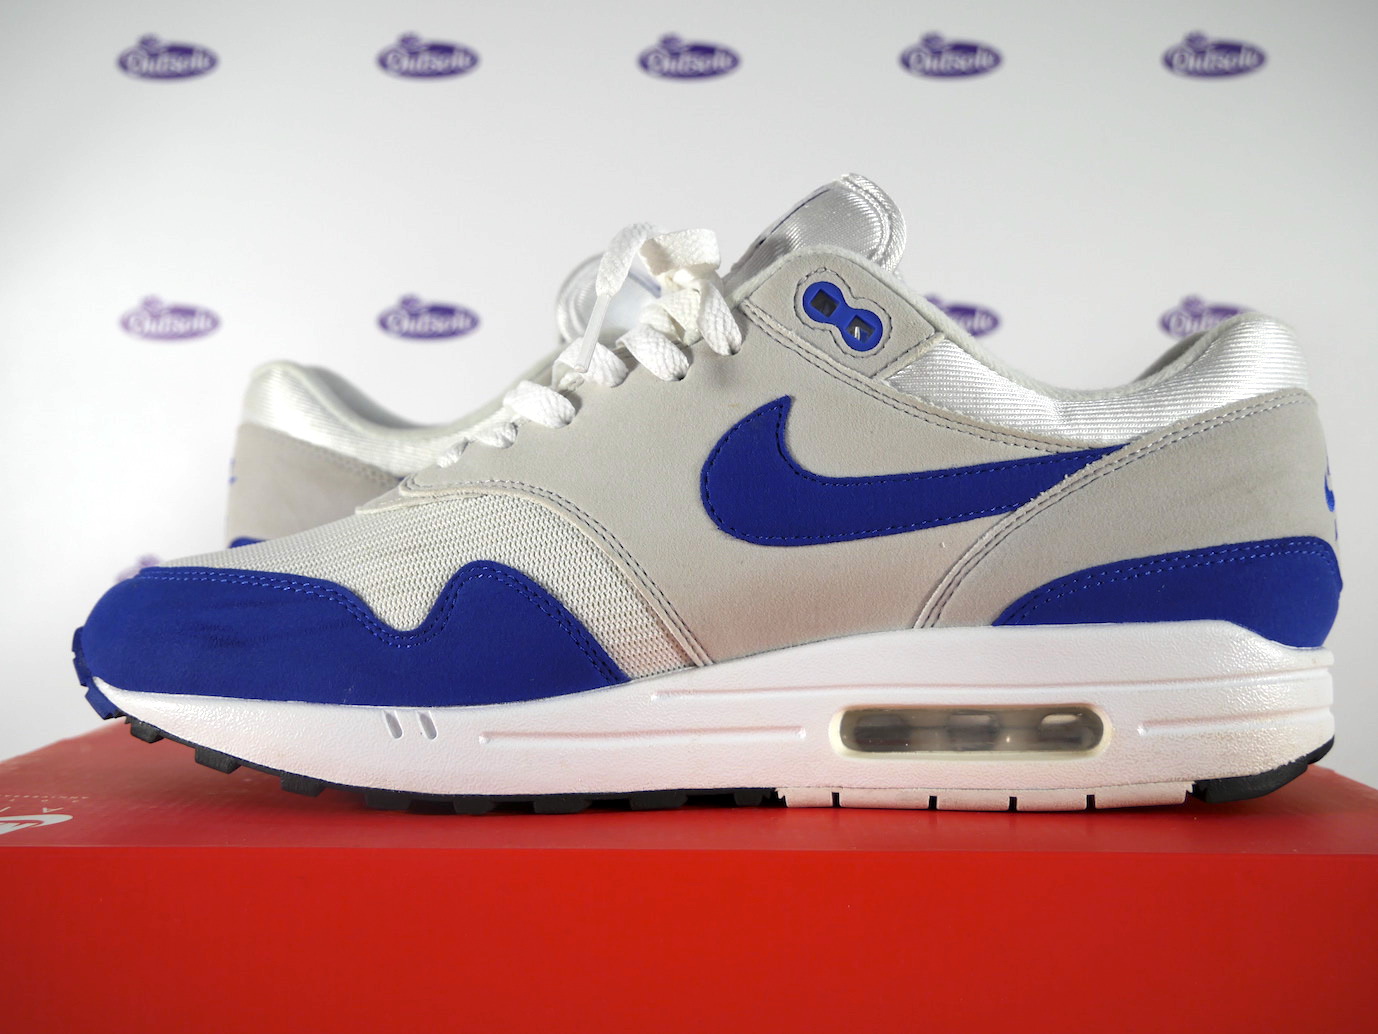 Nike Air Max 1 Anniversary OG Royal Blue • In stock at Outsole